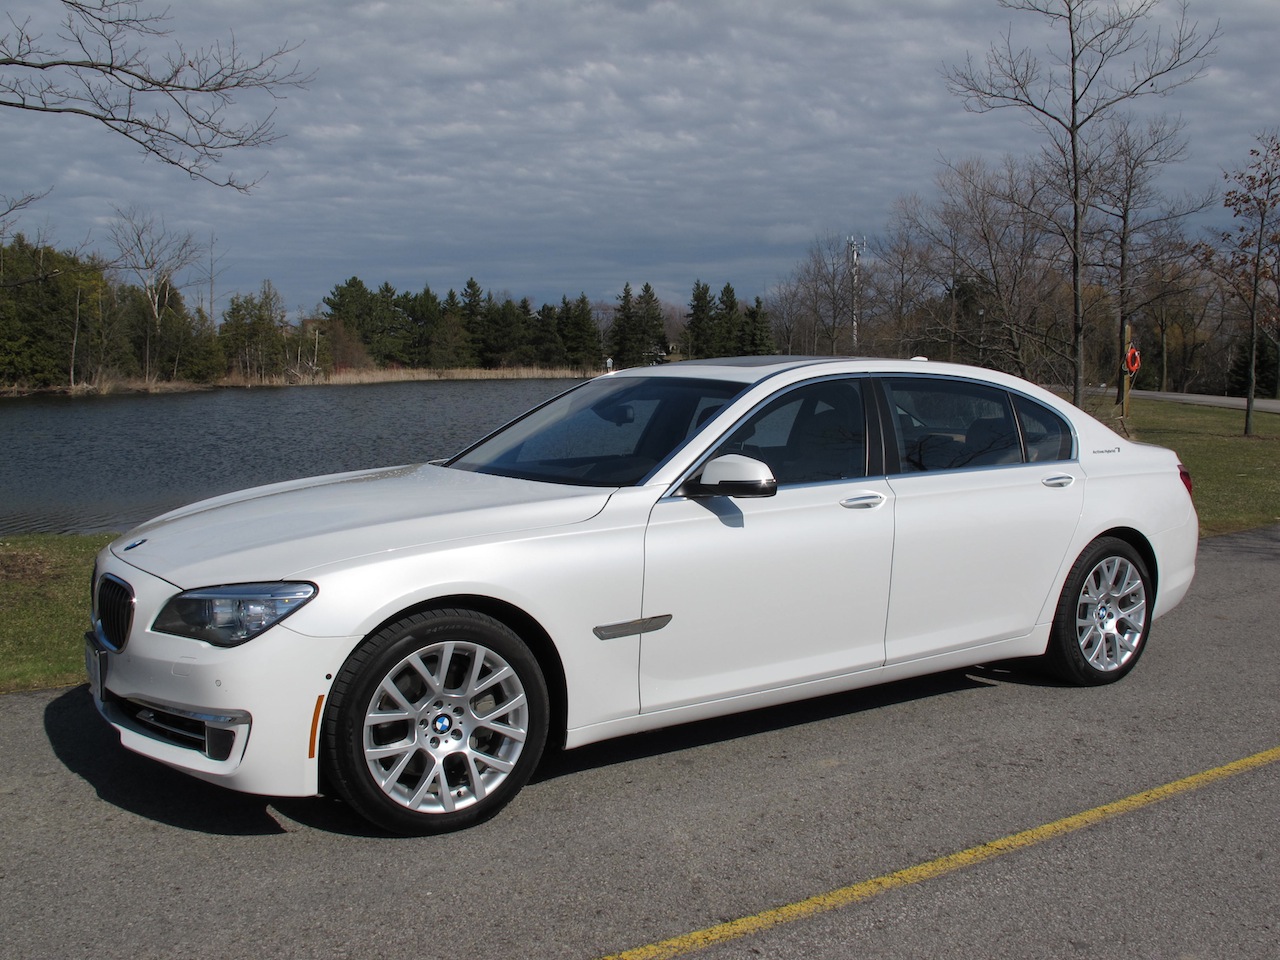 2013 BMW Activehybrid7 Review - Cars, Photos, Test Drives, and Reviews |  Canadian Auto Review